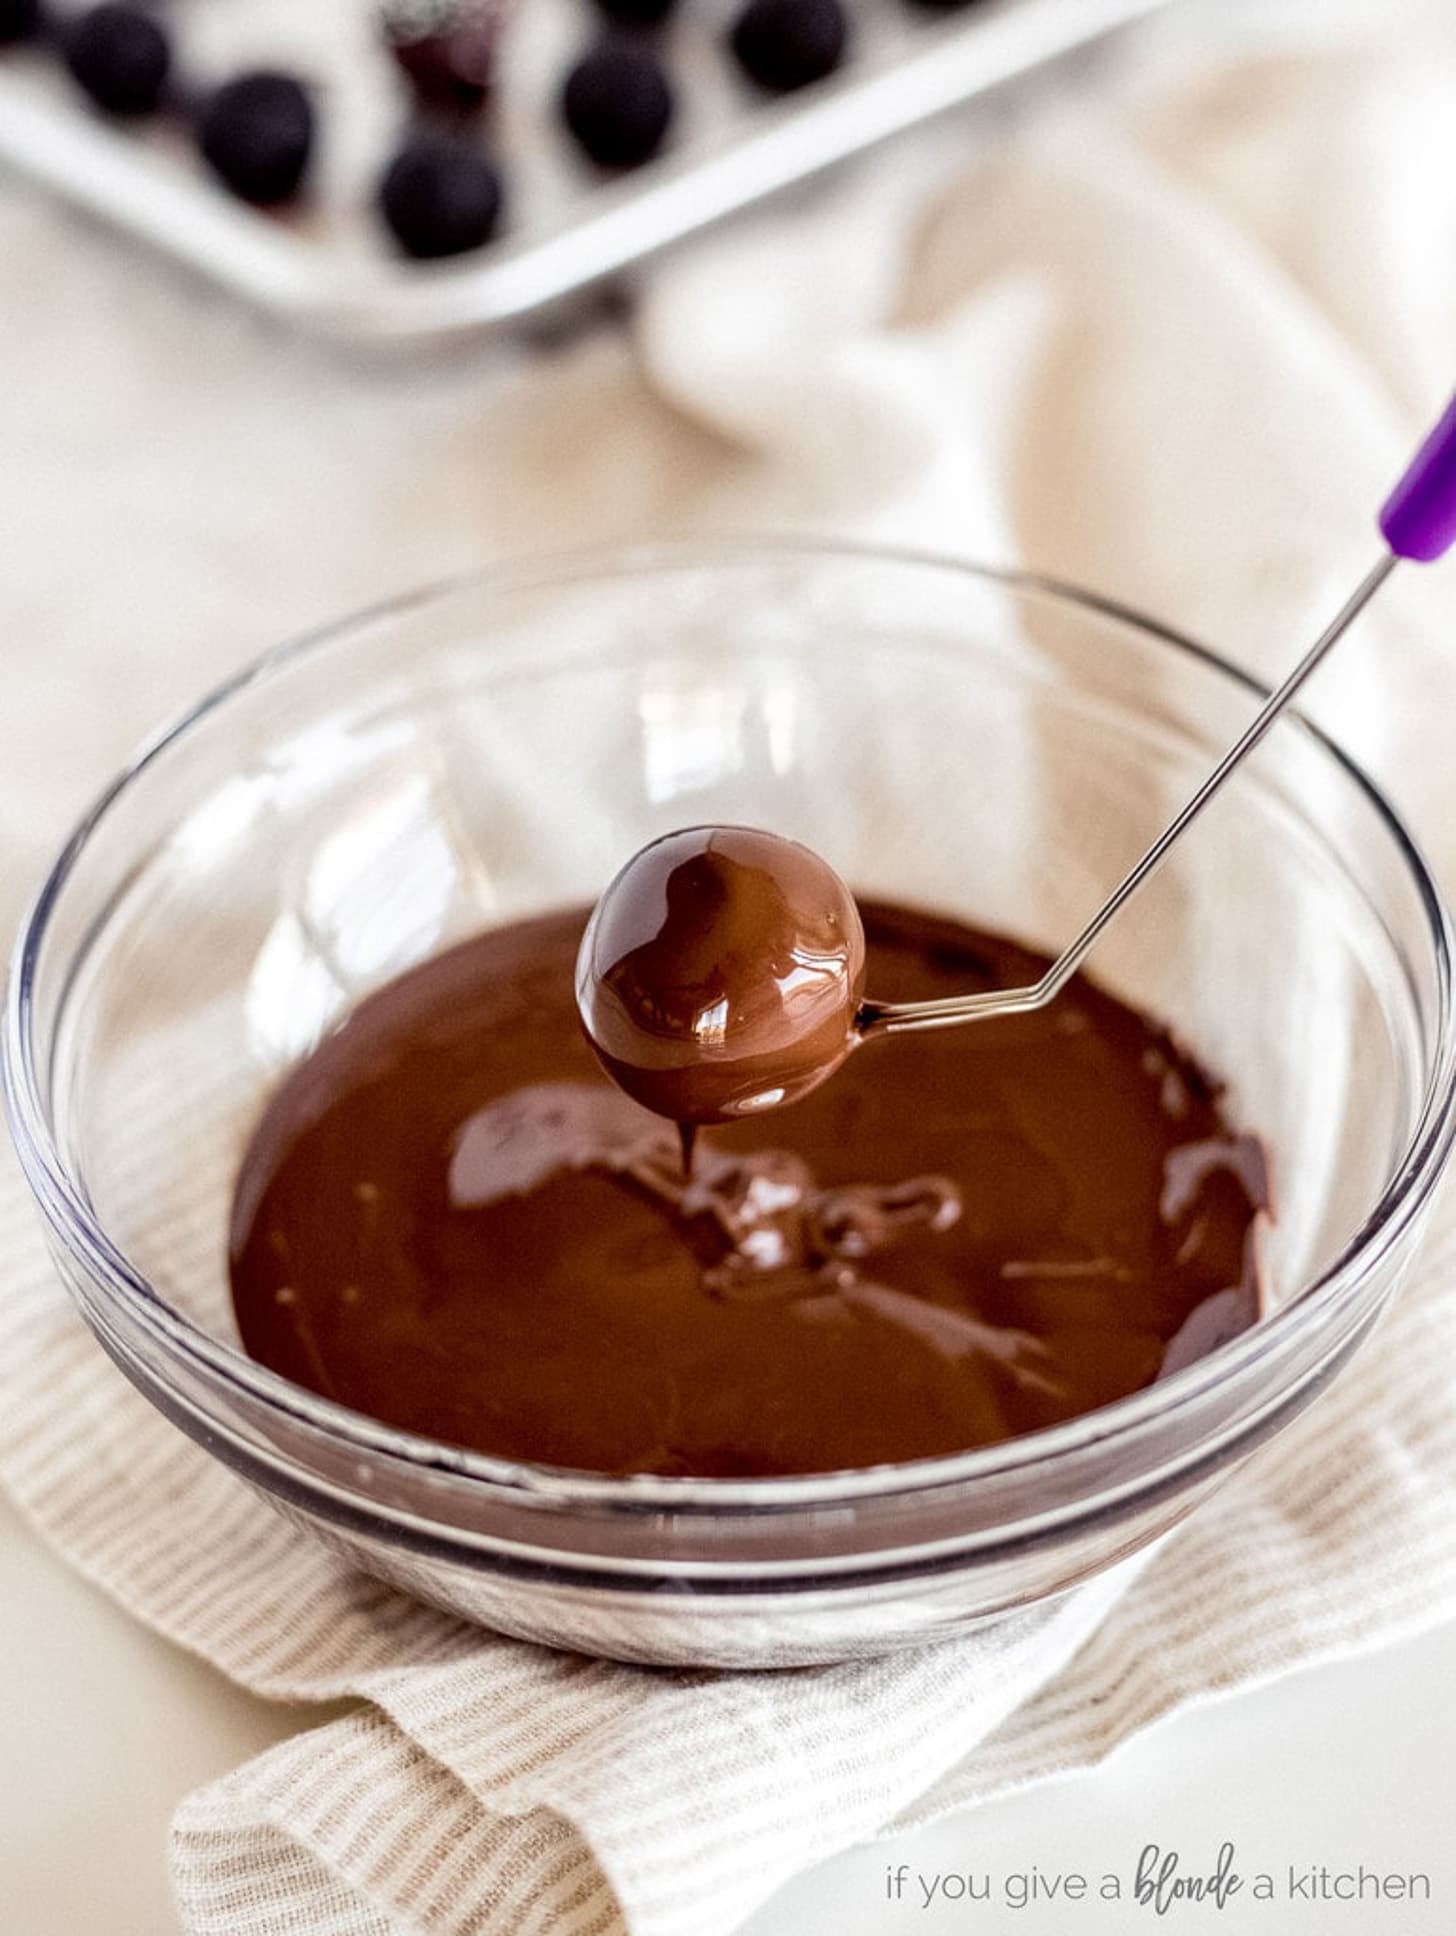 dipping tool holding chocolate covered oreo truffle over bowl of melted chocolate.